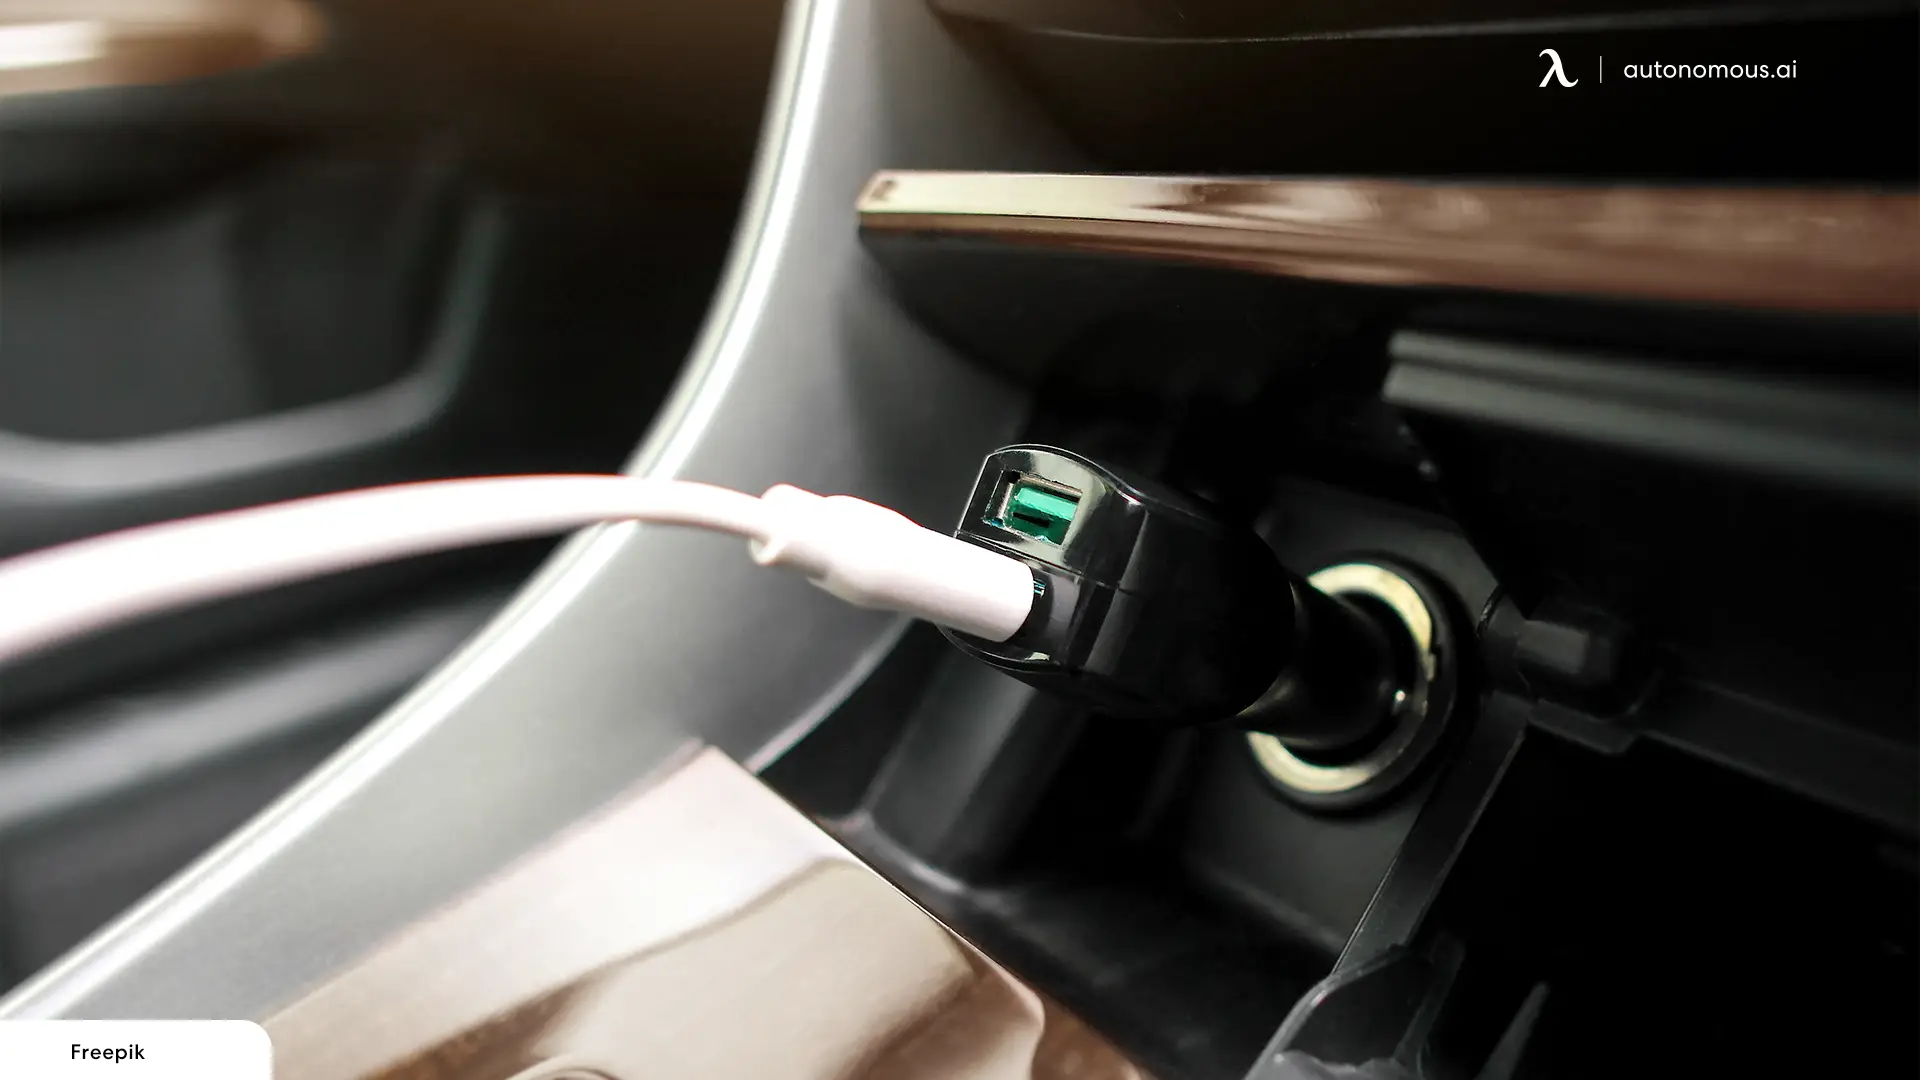 Use Your Car's Power Connection to Charge the Laptop